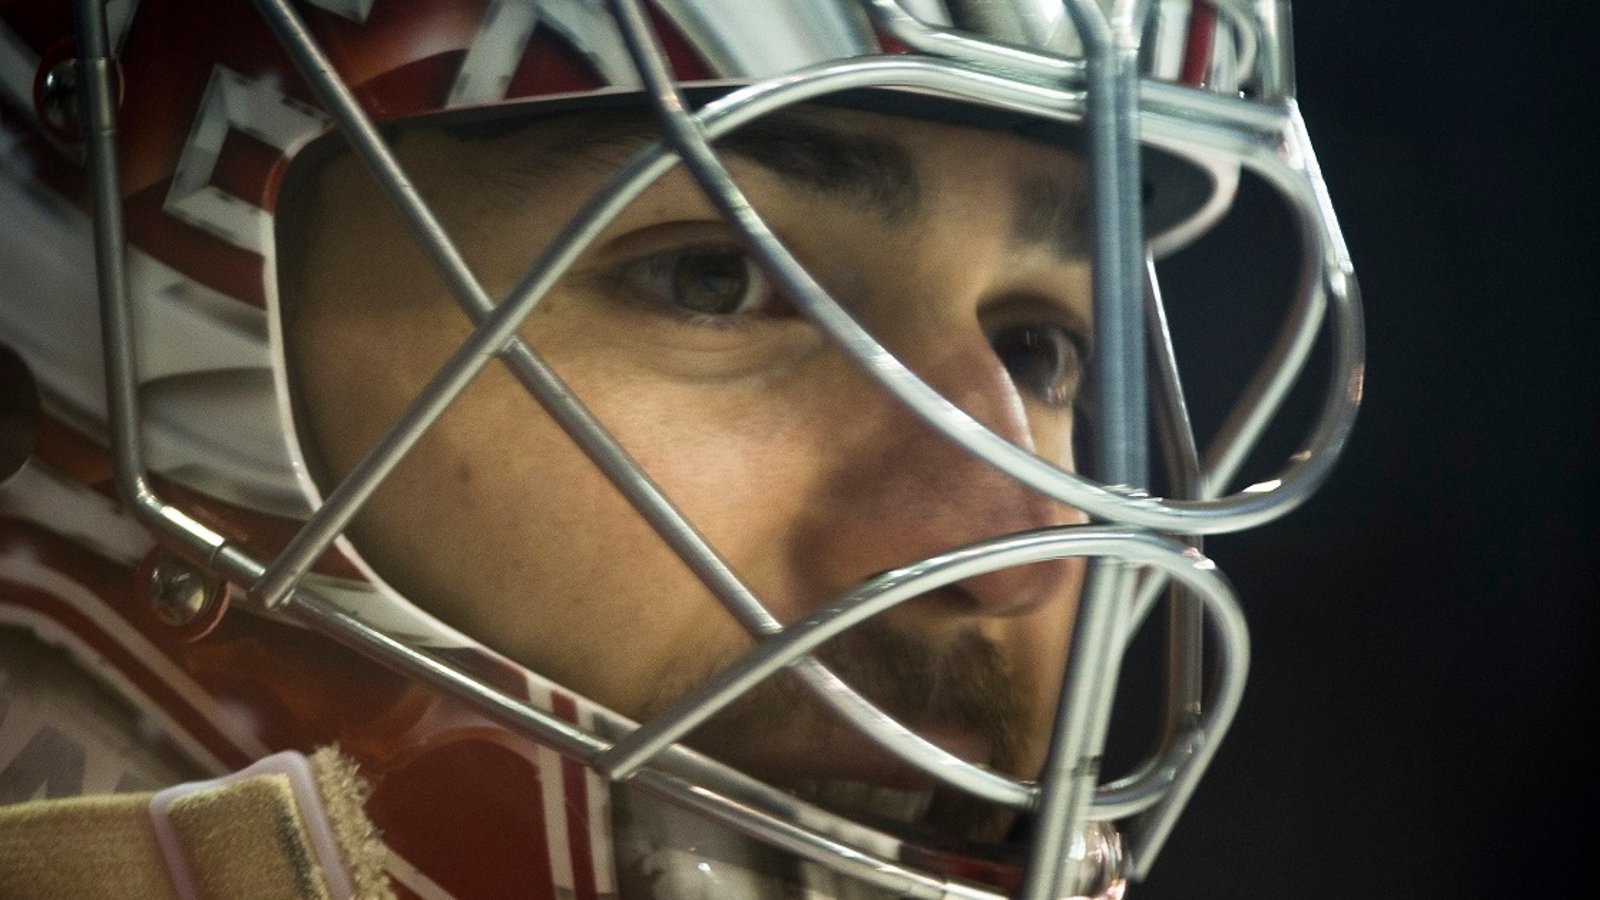 Big update on Carey Price who has yet to play this season.